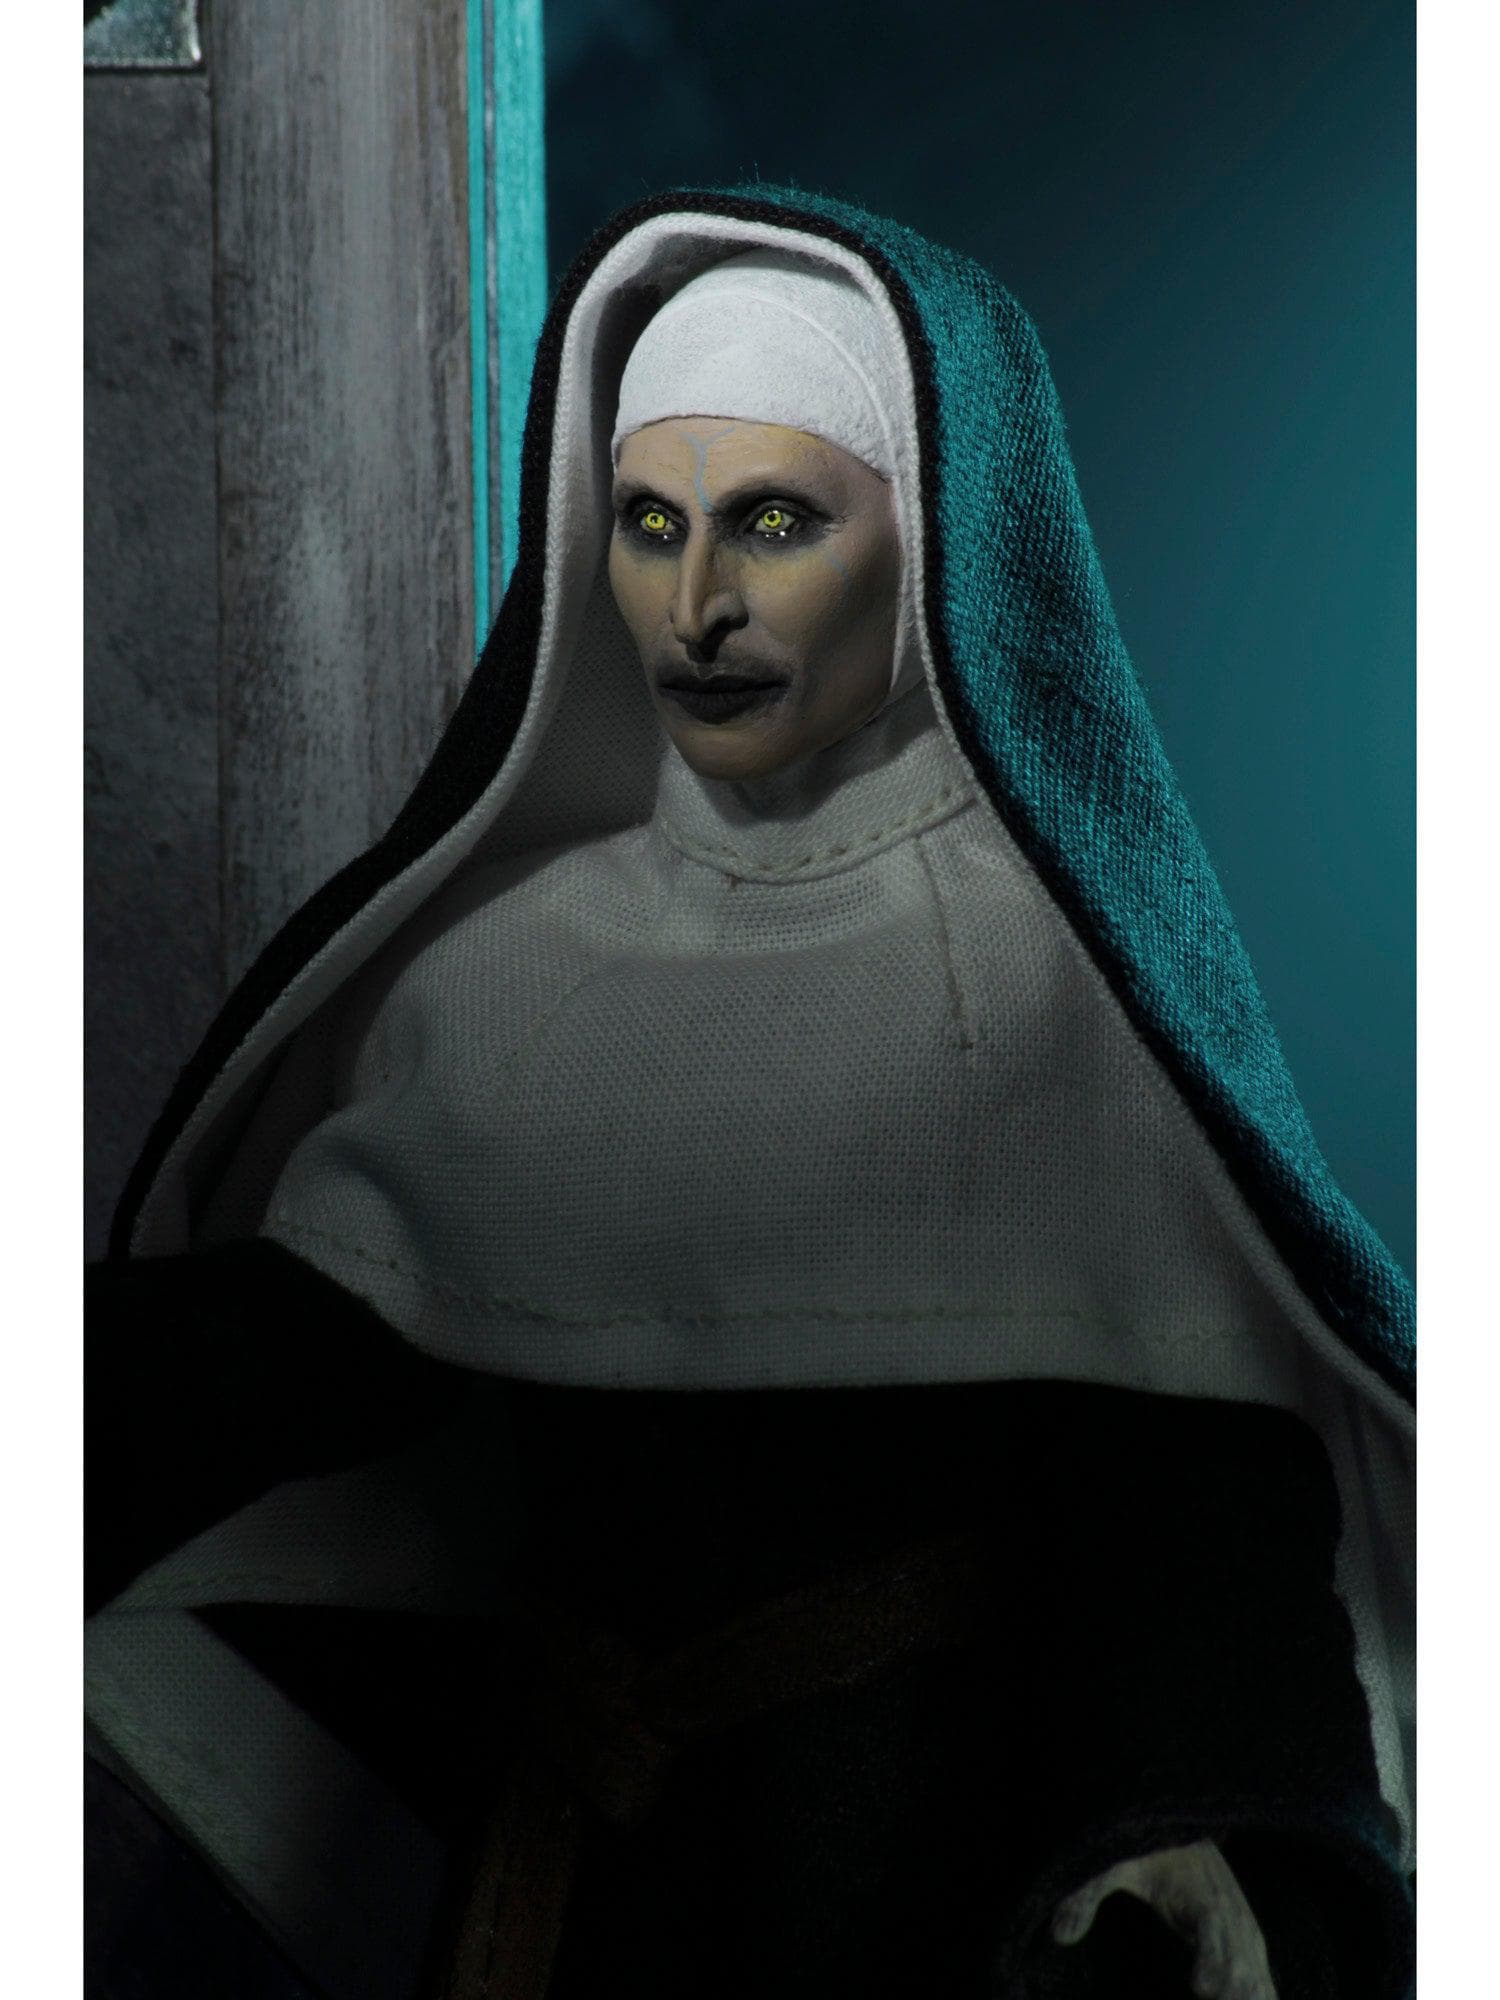 NECA - The Nun - 8" Clothed Action Figure - The Nun - costumes.com